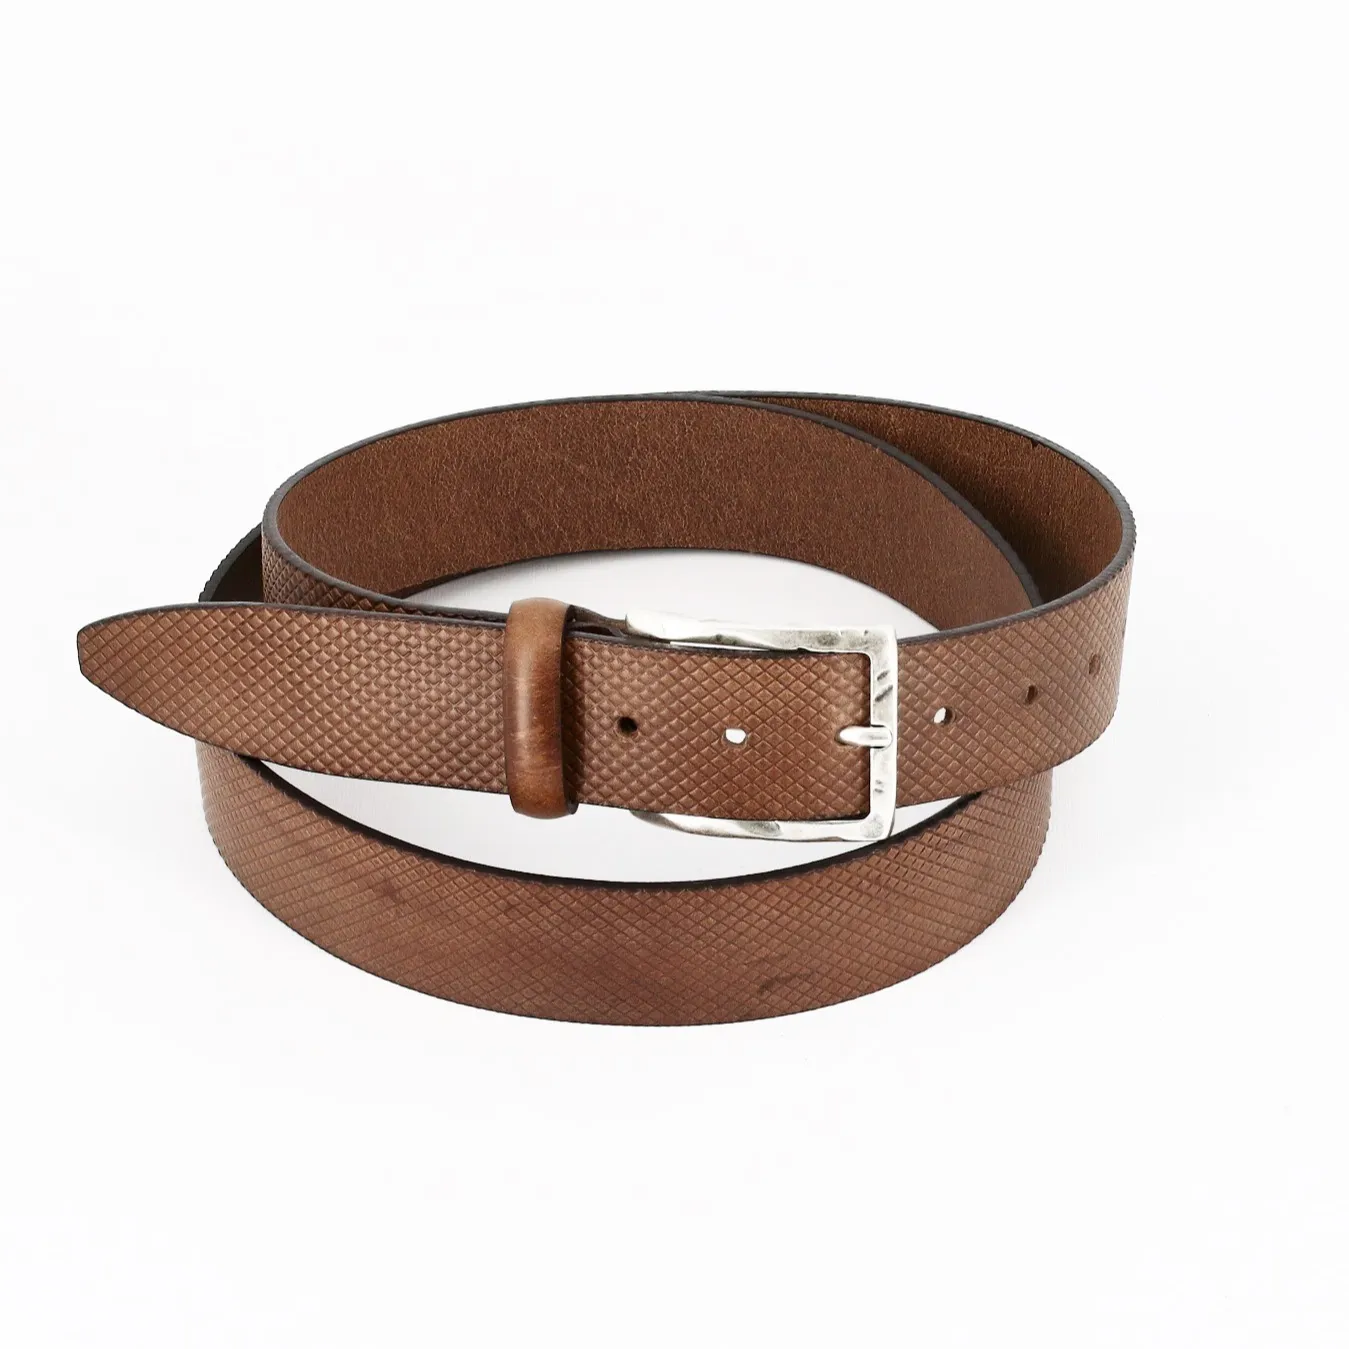 Checked Printed Genuine Leather Men's Belt Custom Logo 100% Made In Italy Casual Leather Classic Belt